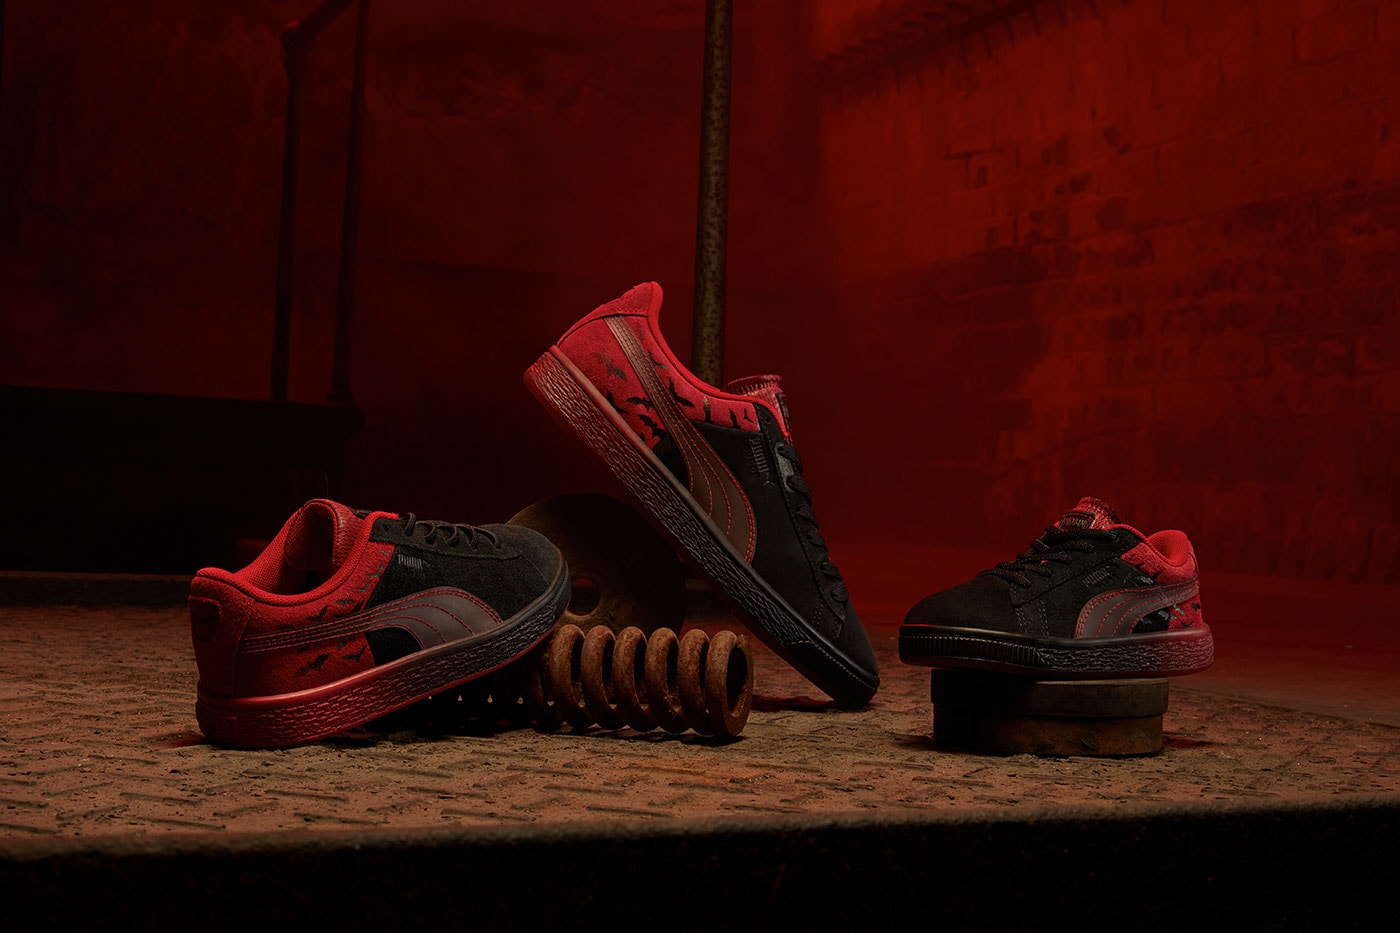 PUMA and DC Comics Join Forces for a Limited Edition Batman Collection robert pattinson warner bros. gotham city puma suede fierce 2 rs-x silhouette mayze court rider batman ultra future z 